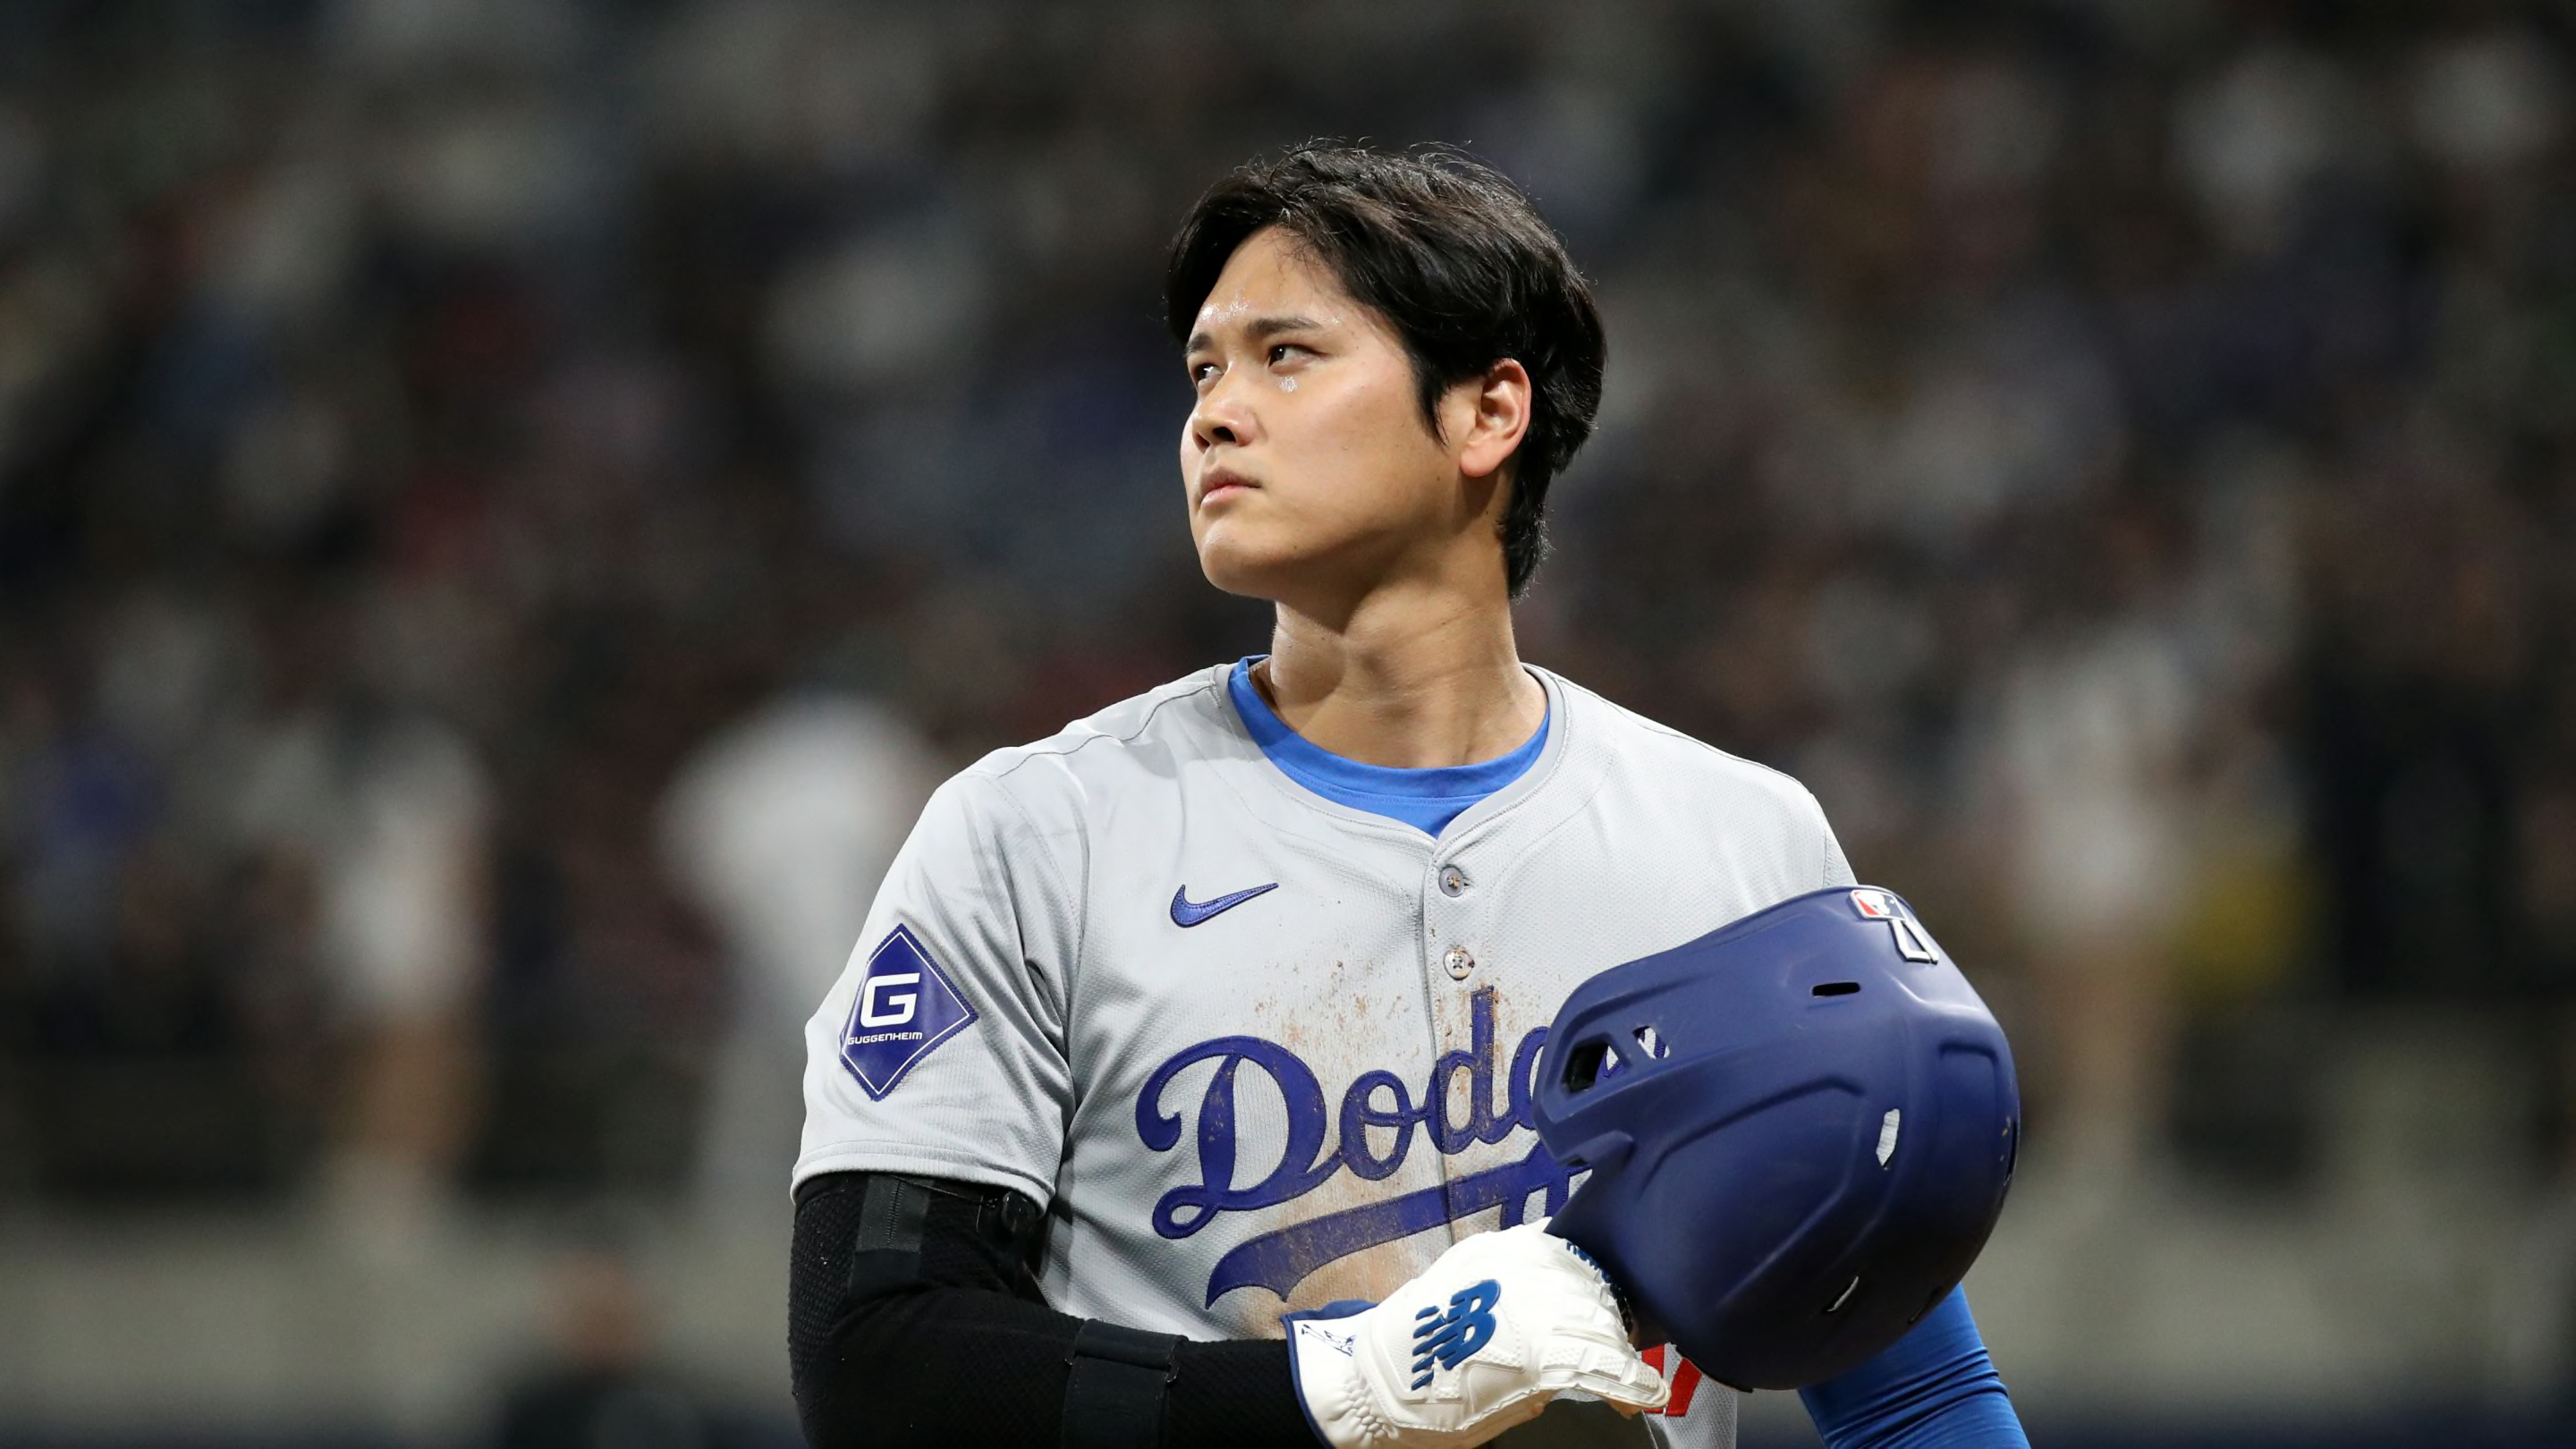 Details of Shohei Ohtani Gambling Scandal Are Nuts